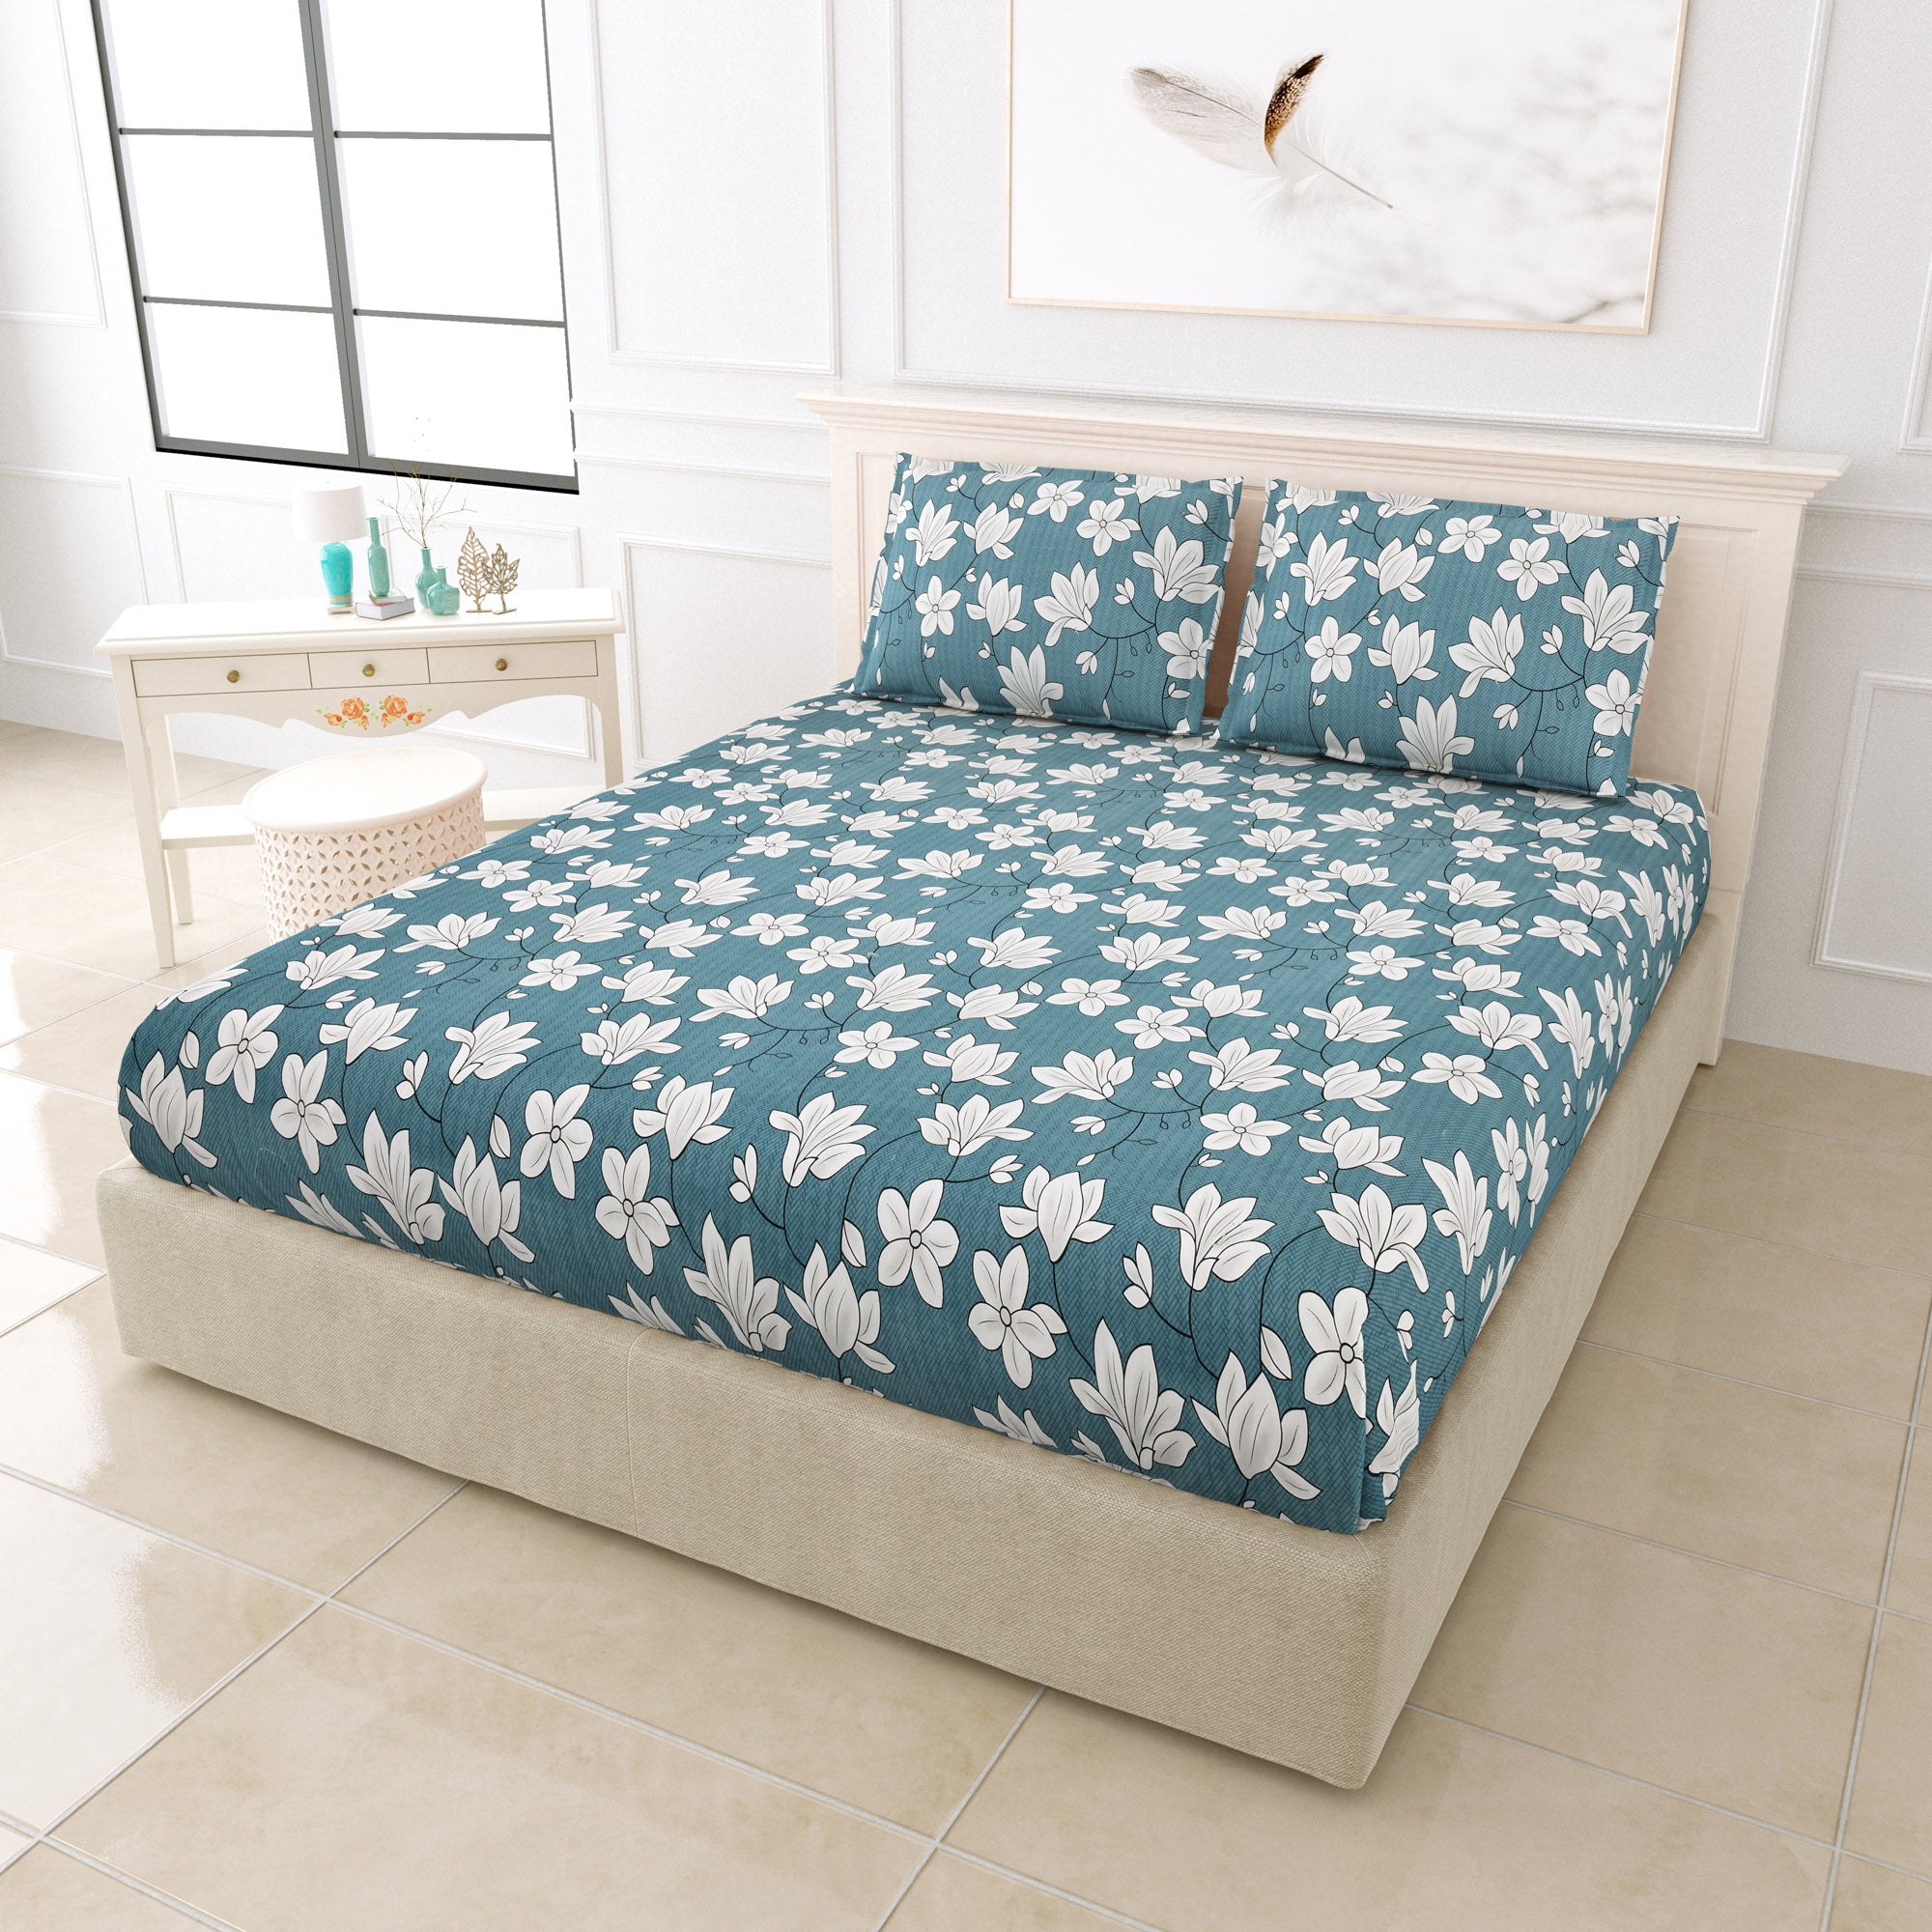 eCraftIndia 250 TC Blue, White Flowers Printed Cotton Double Bedsheet With 2 Pillow Covers 1